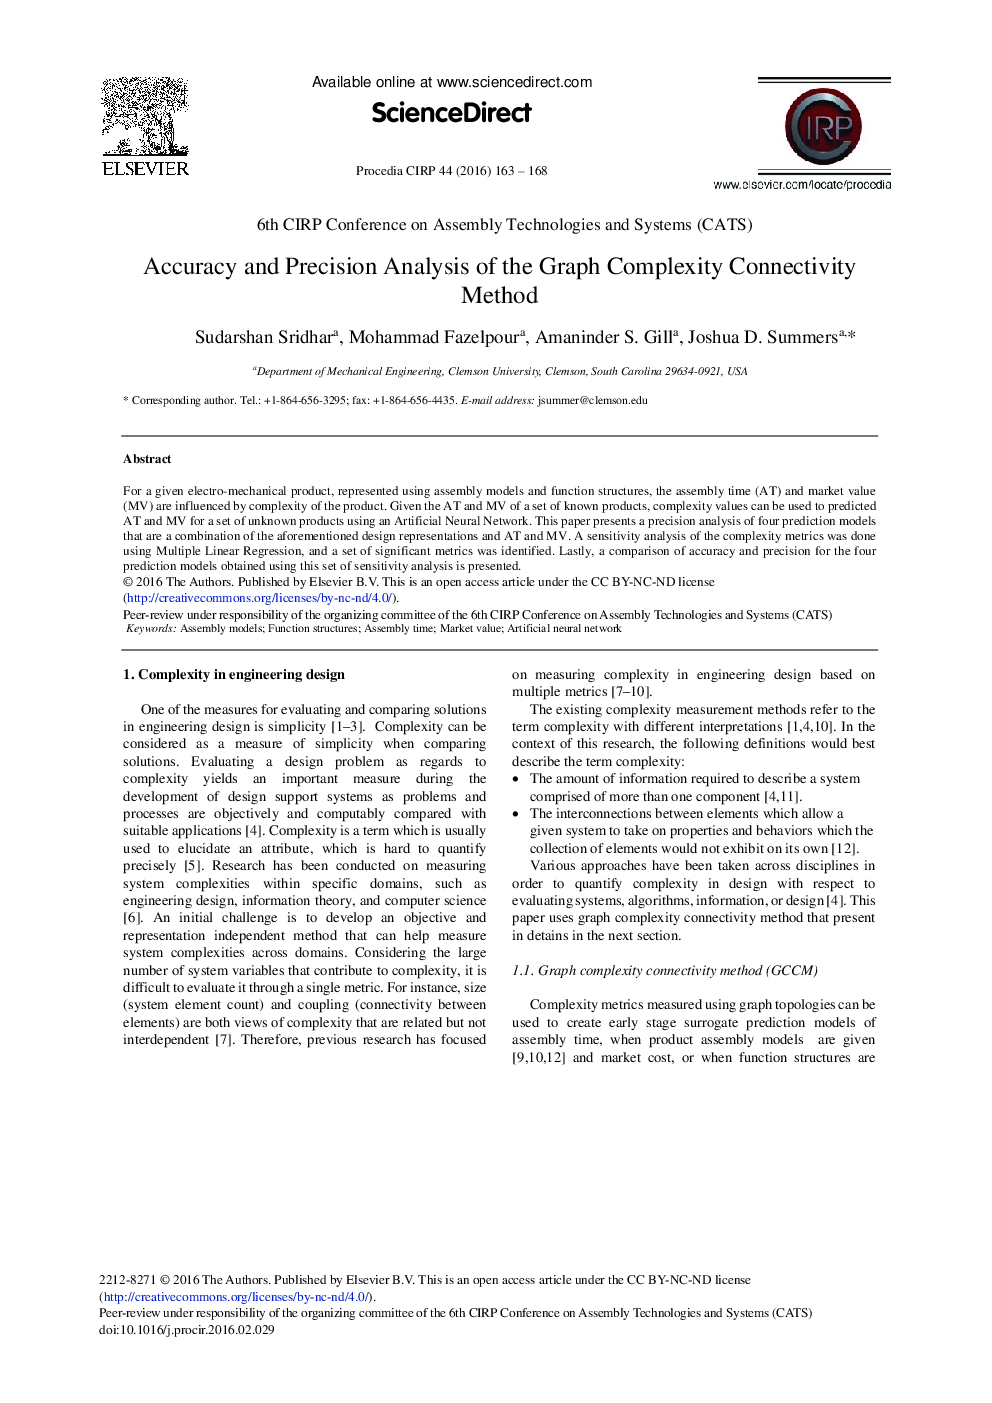 Accuracy and Precision Analysis of the Graph Complexity Connectivity Method 